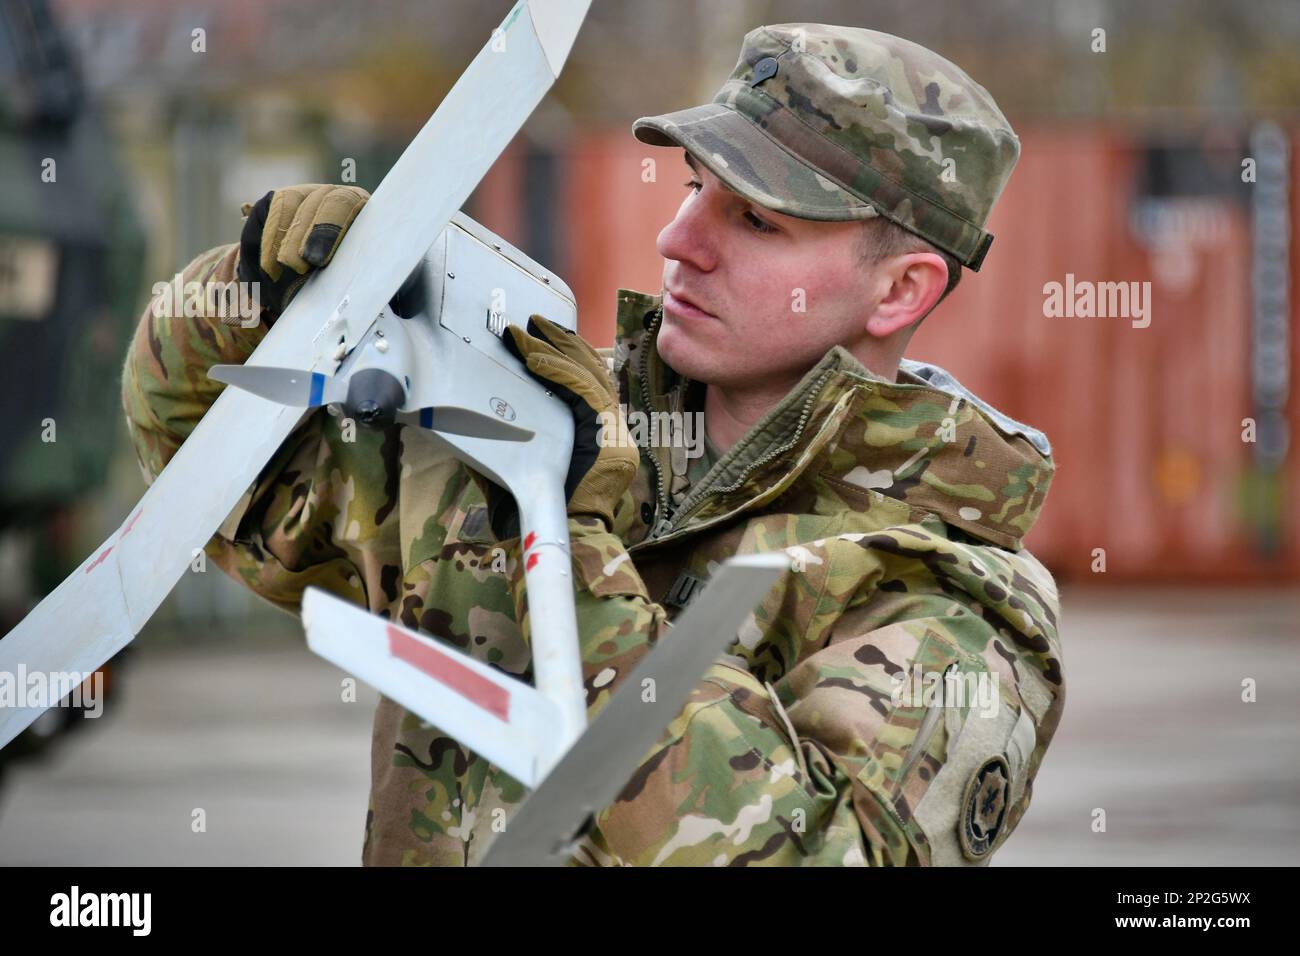 U.S. Army Spc. Charles Ivey with Palehorse Troop, 4th Squadron, 2nd Cavalry Regiment assembles an RQ-11 Raven, a Small Unmanned Aircraft System, ahead of a training exercise on Rose Barracks, Vilseck, Germany, Jan. 10, 2023. 2CR provides V Corps with a lethal and agile force capable of rapid deployment throughout the European theater in order to assure allies, deter adversaries, and when ordered, defend the NATO alliance. Stock Photo